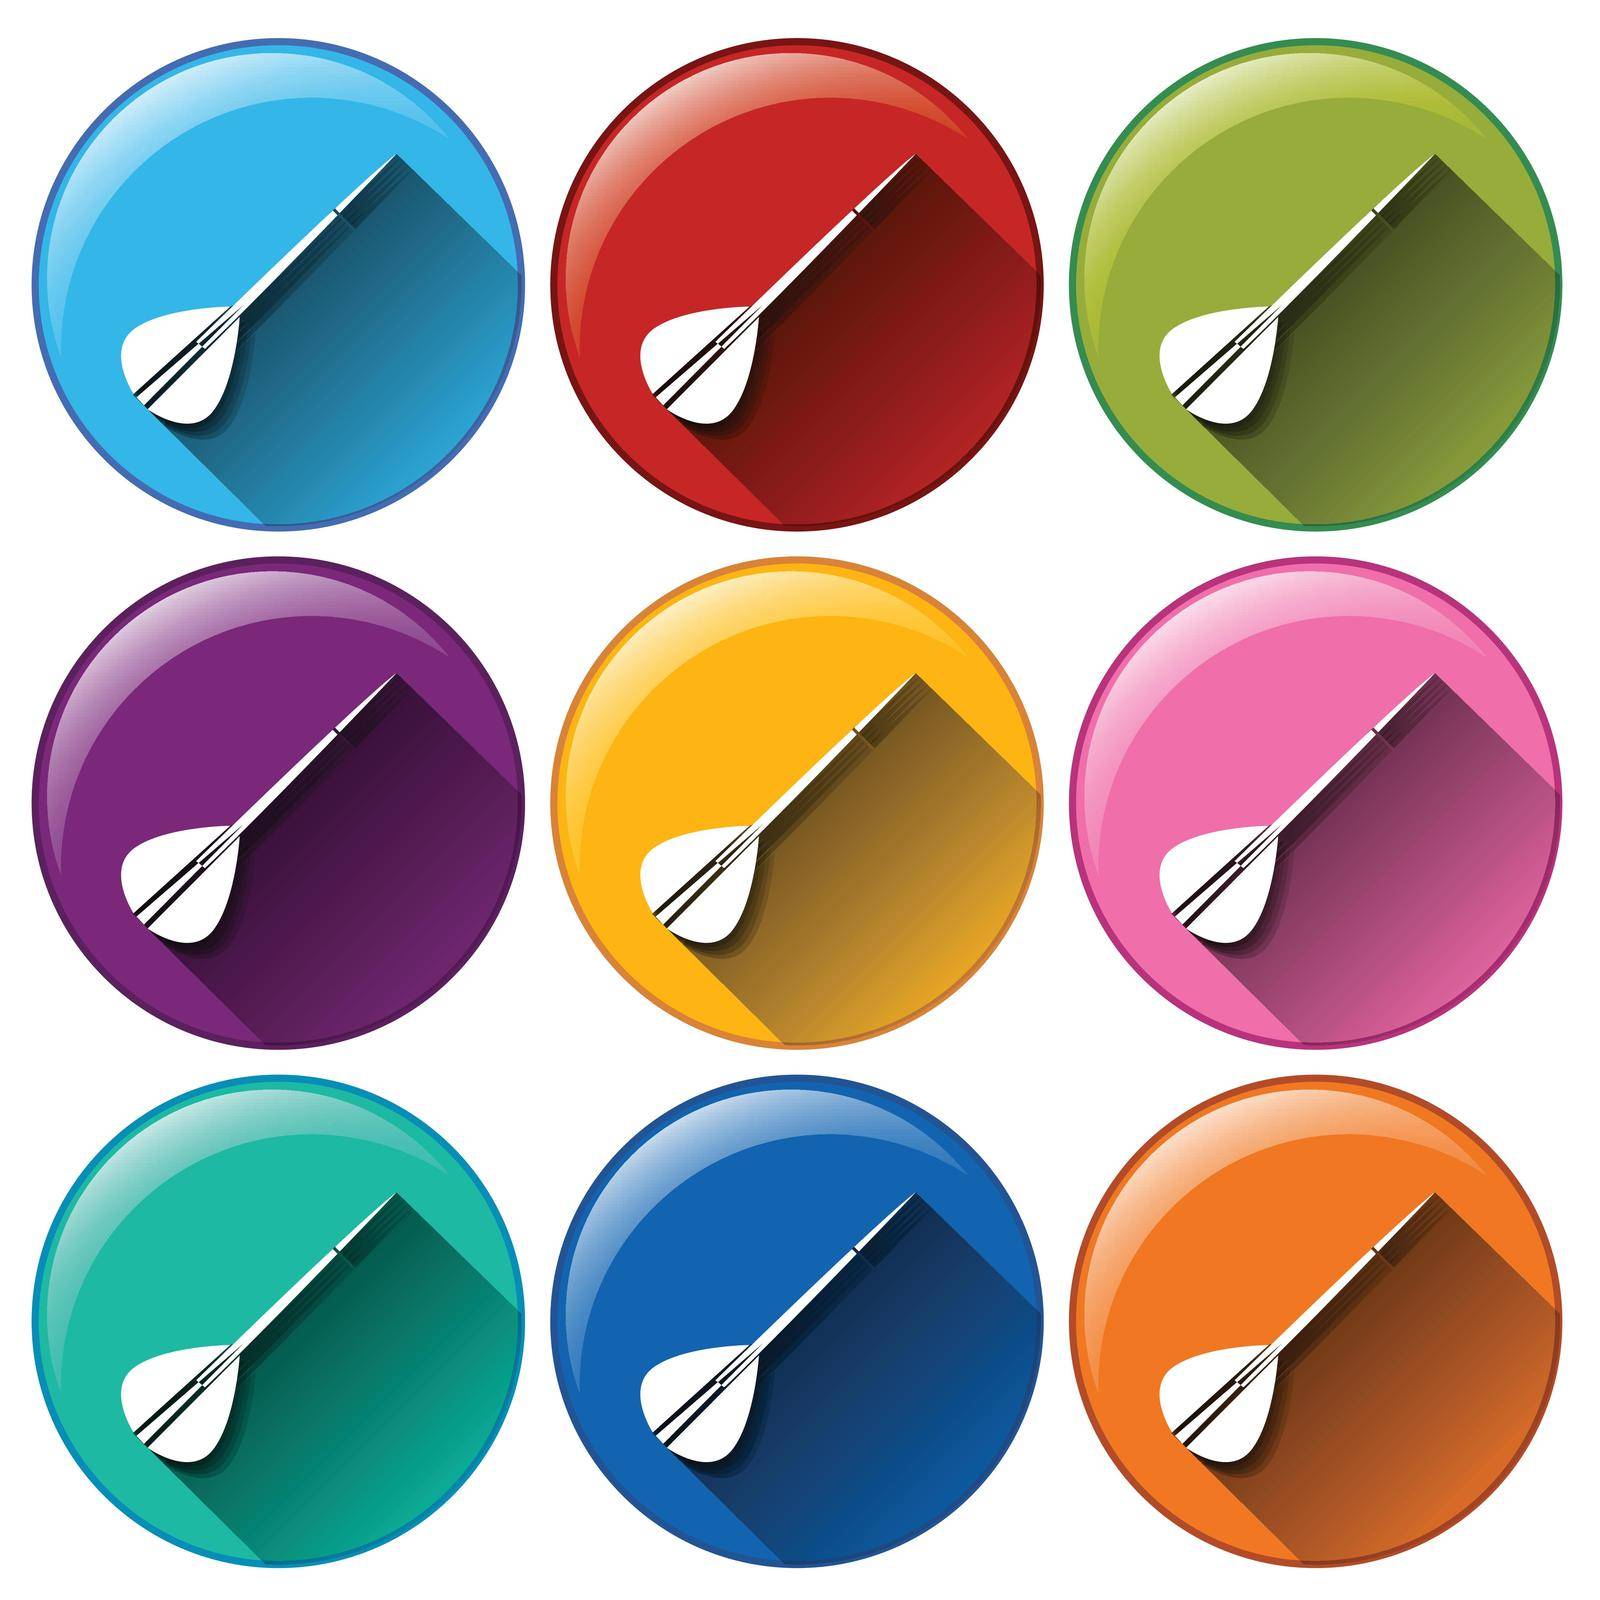 Illustration of the round icons with darts on a white background